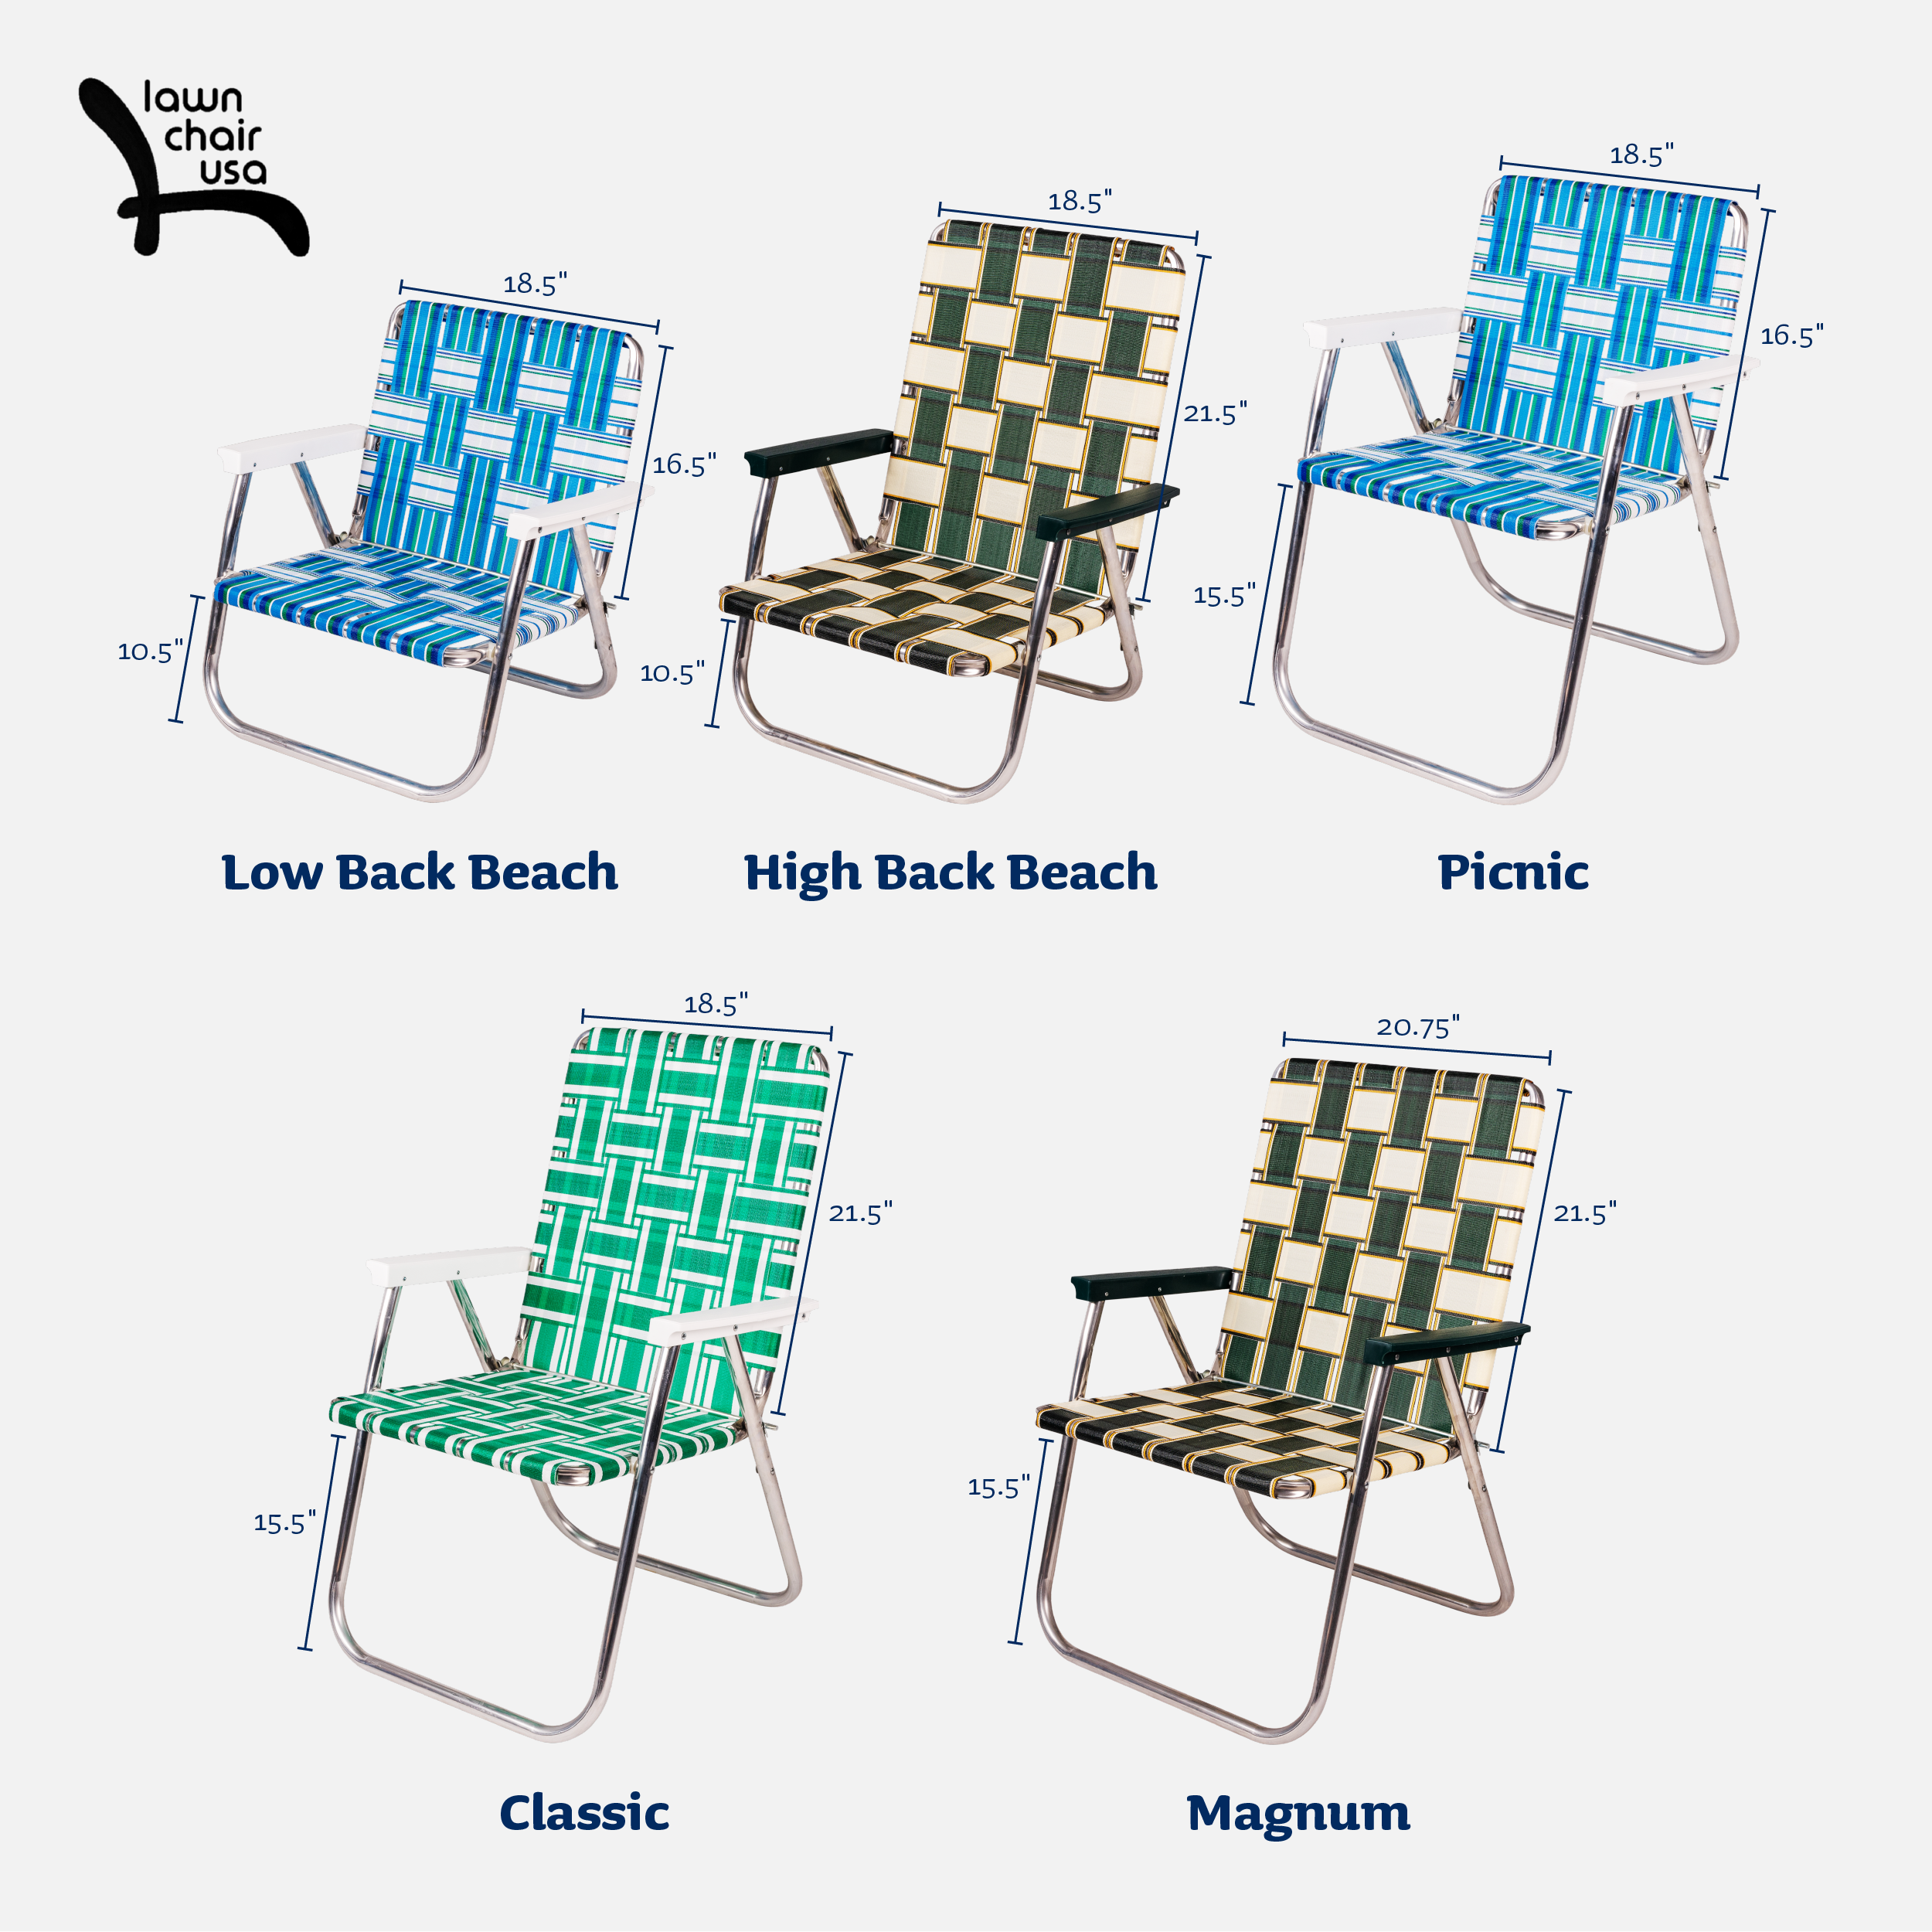 Lawn Chair USA Aluminum Folding Chair (1 Pack), Sea Island - image 3 of 6